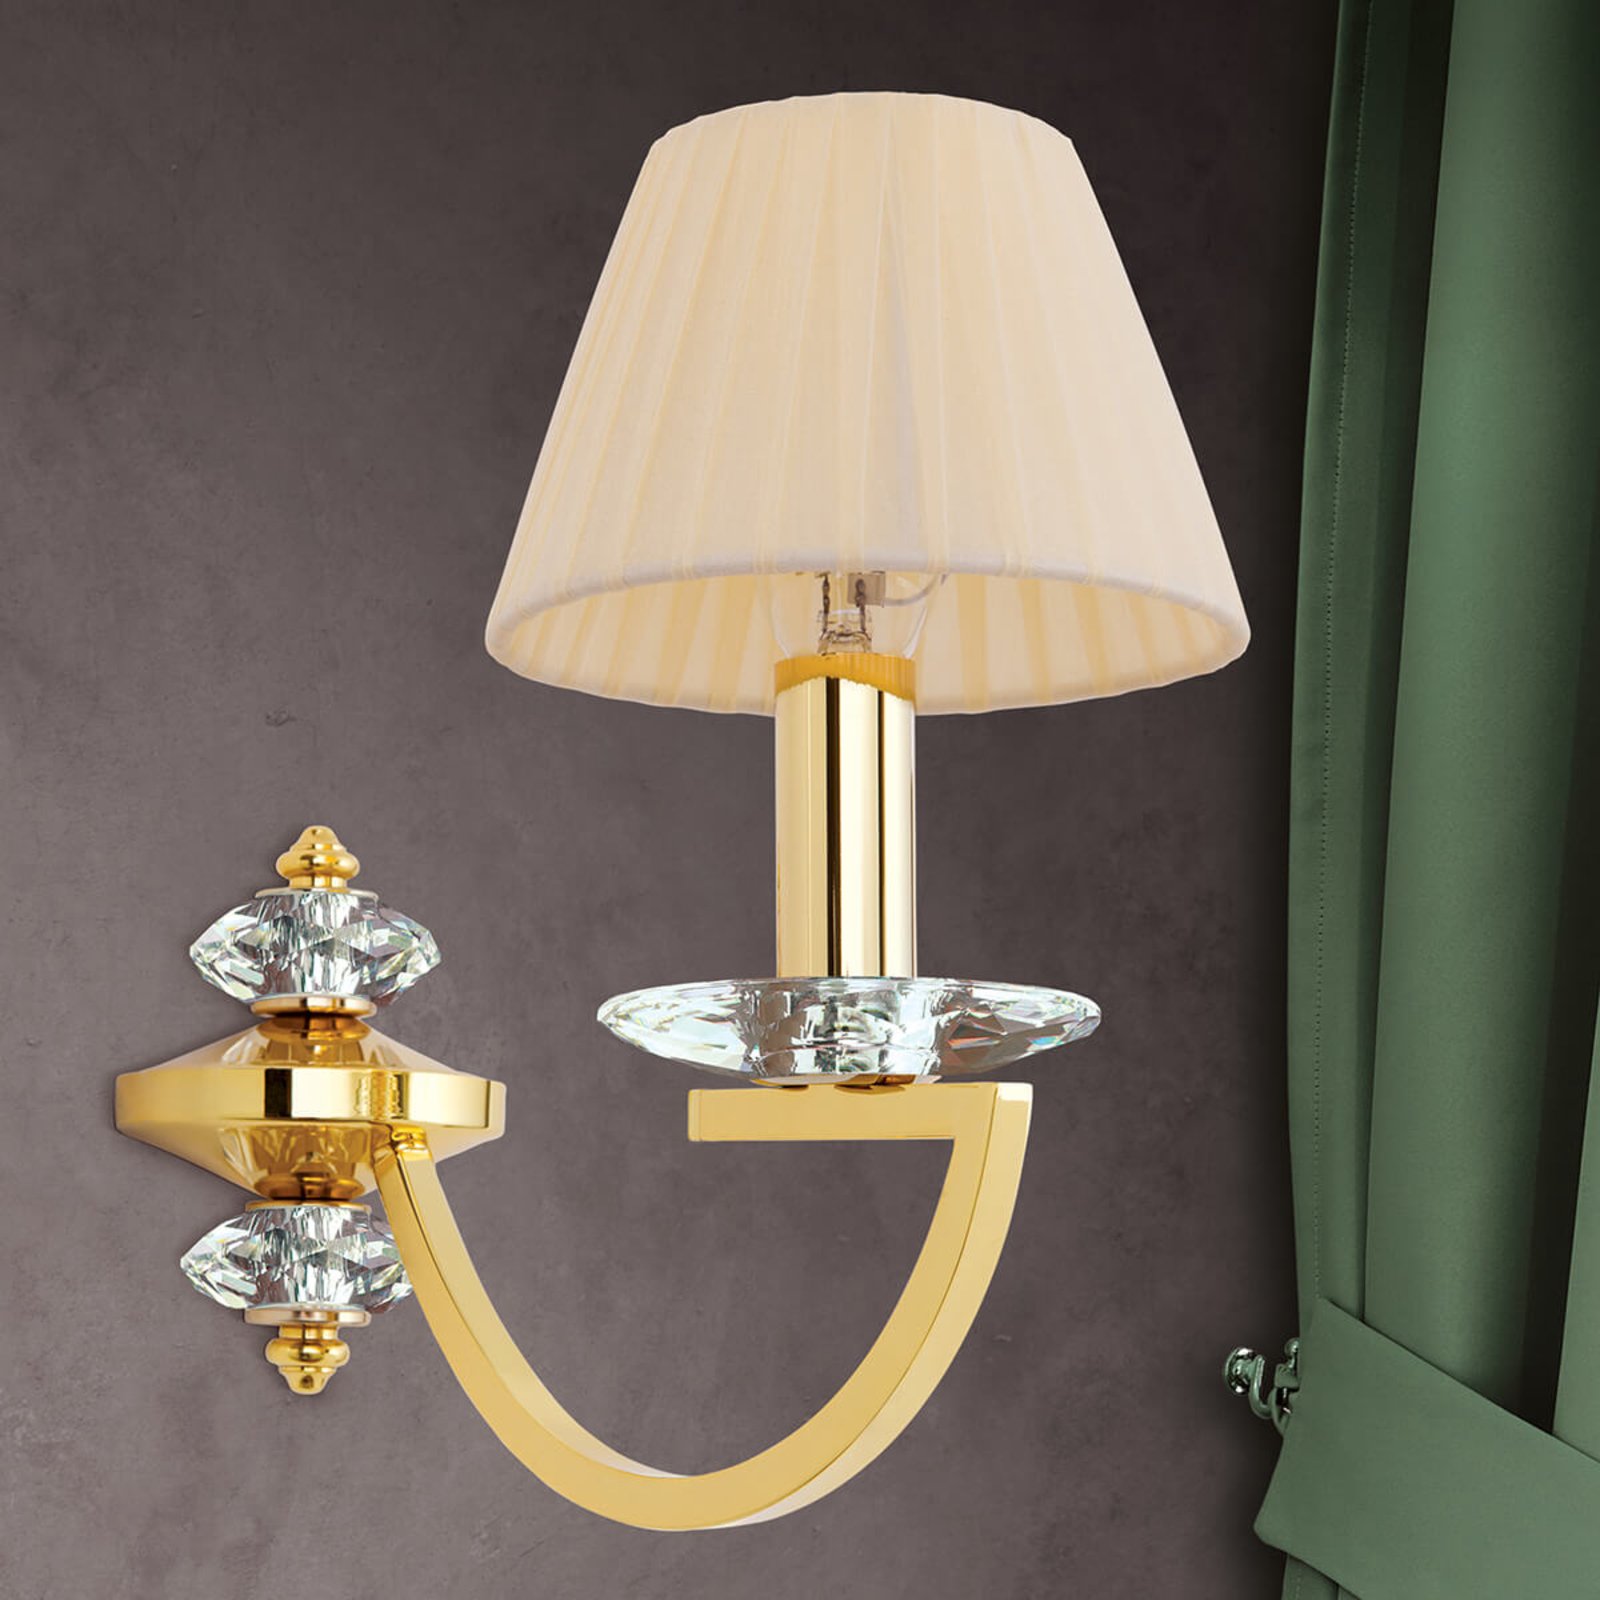 Avala wall lamp, solid brass